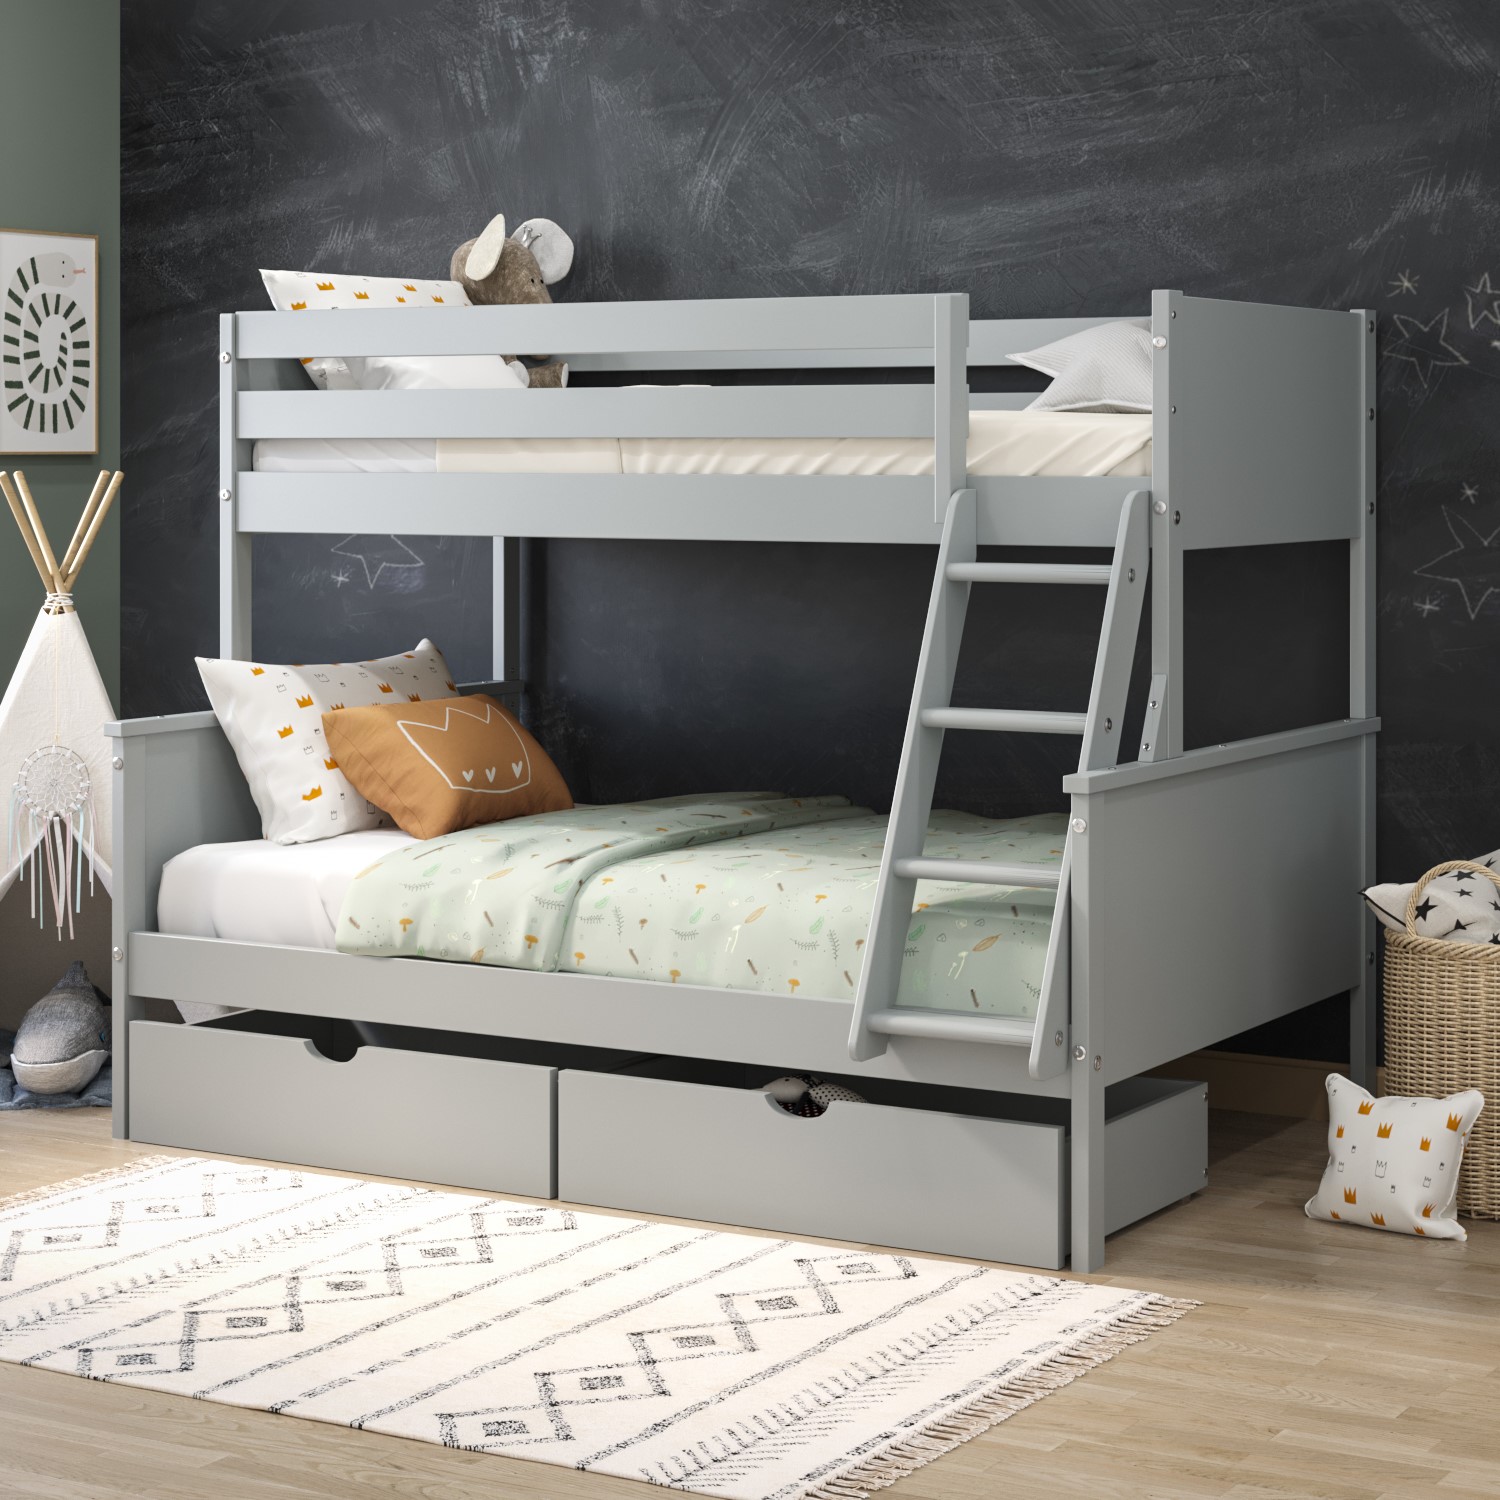 Photo of Grey wooden triple sleeper bunk bed with storage drawers - parker